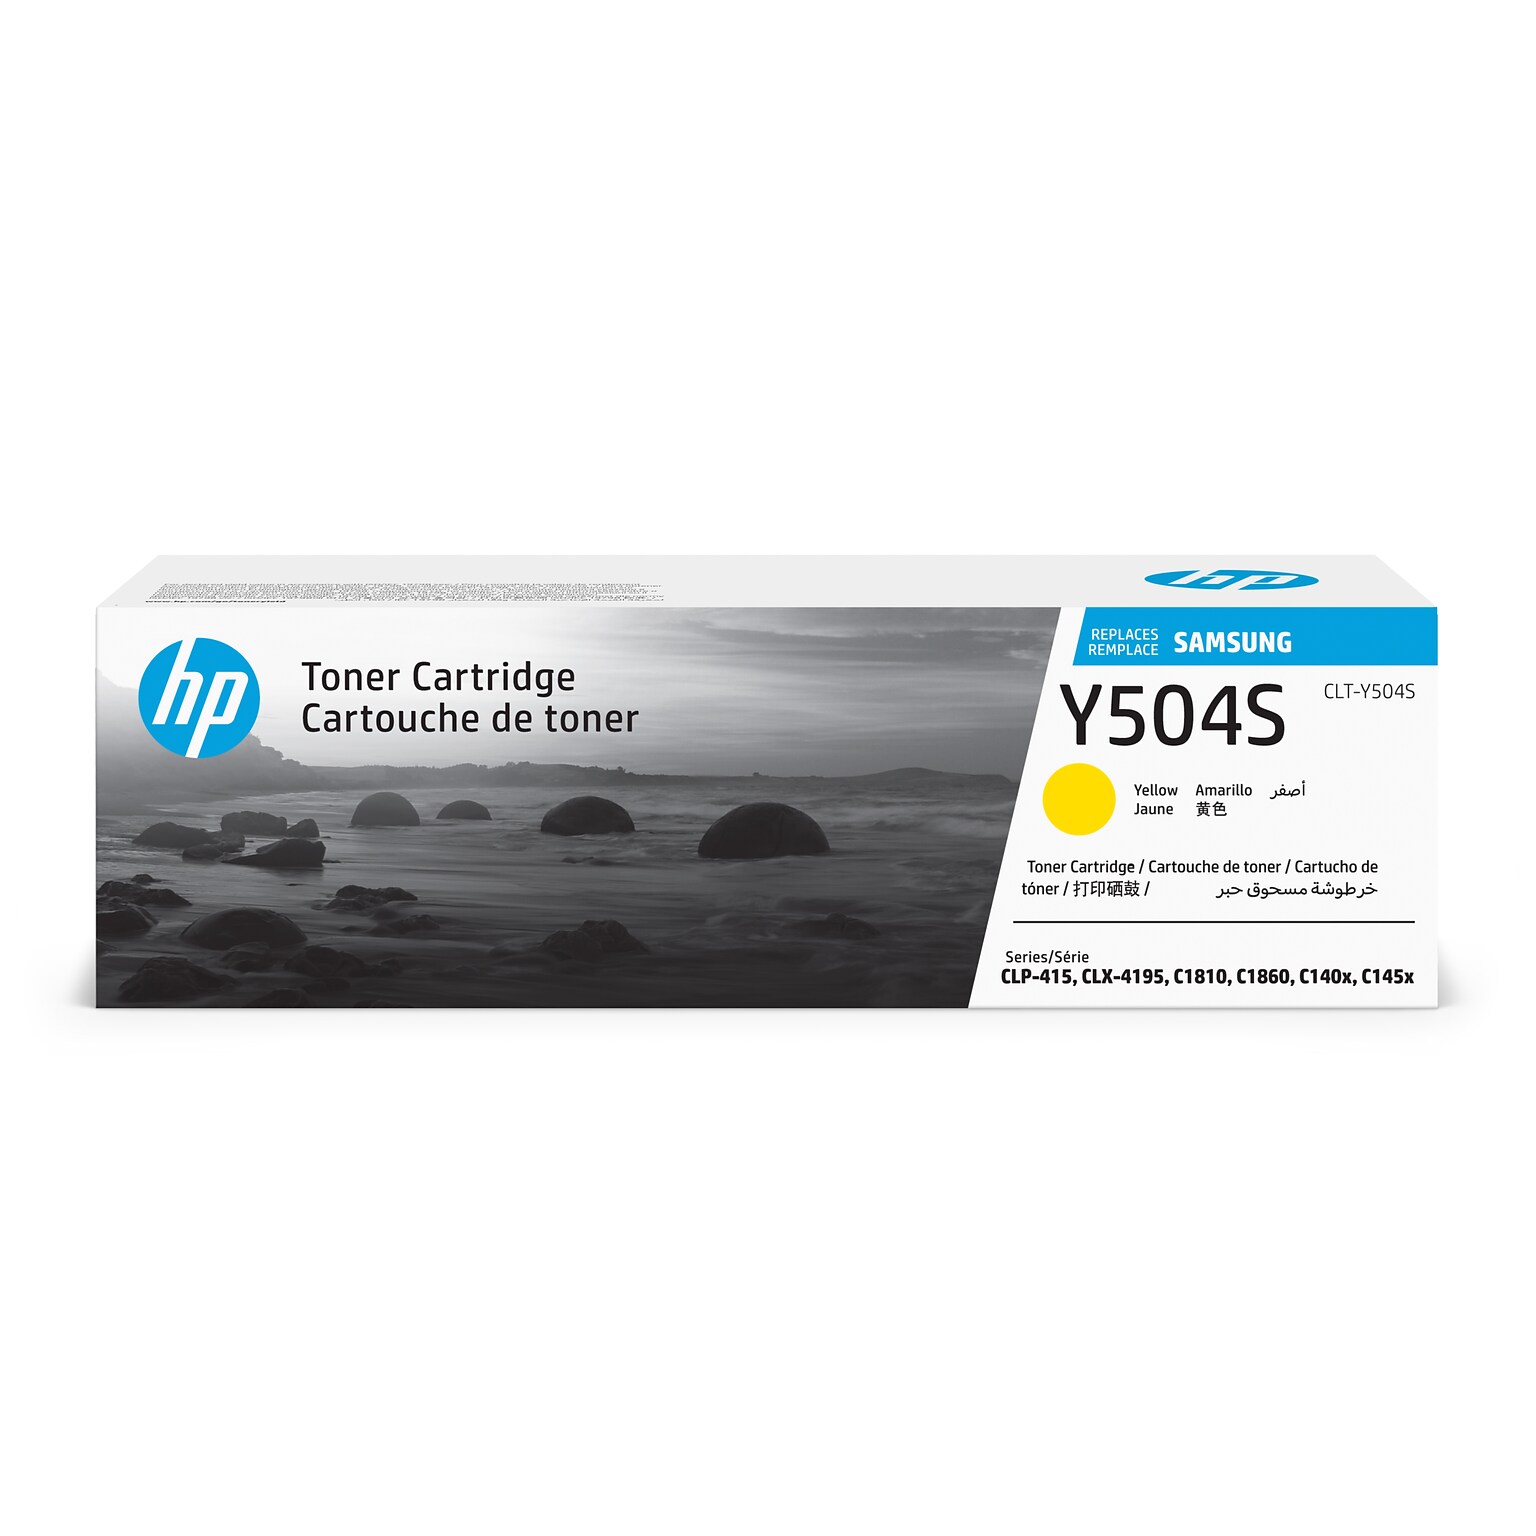 HP Y504S Yellow Toner Cartridge for Samsung CLT-Y504S  (SU502), Samsung-branded printer supplies are now HP-branded